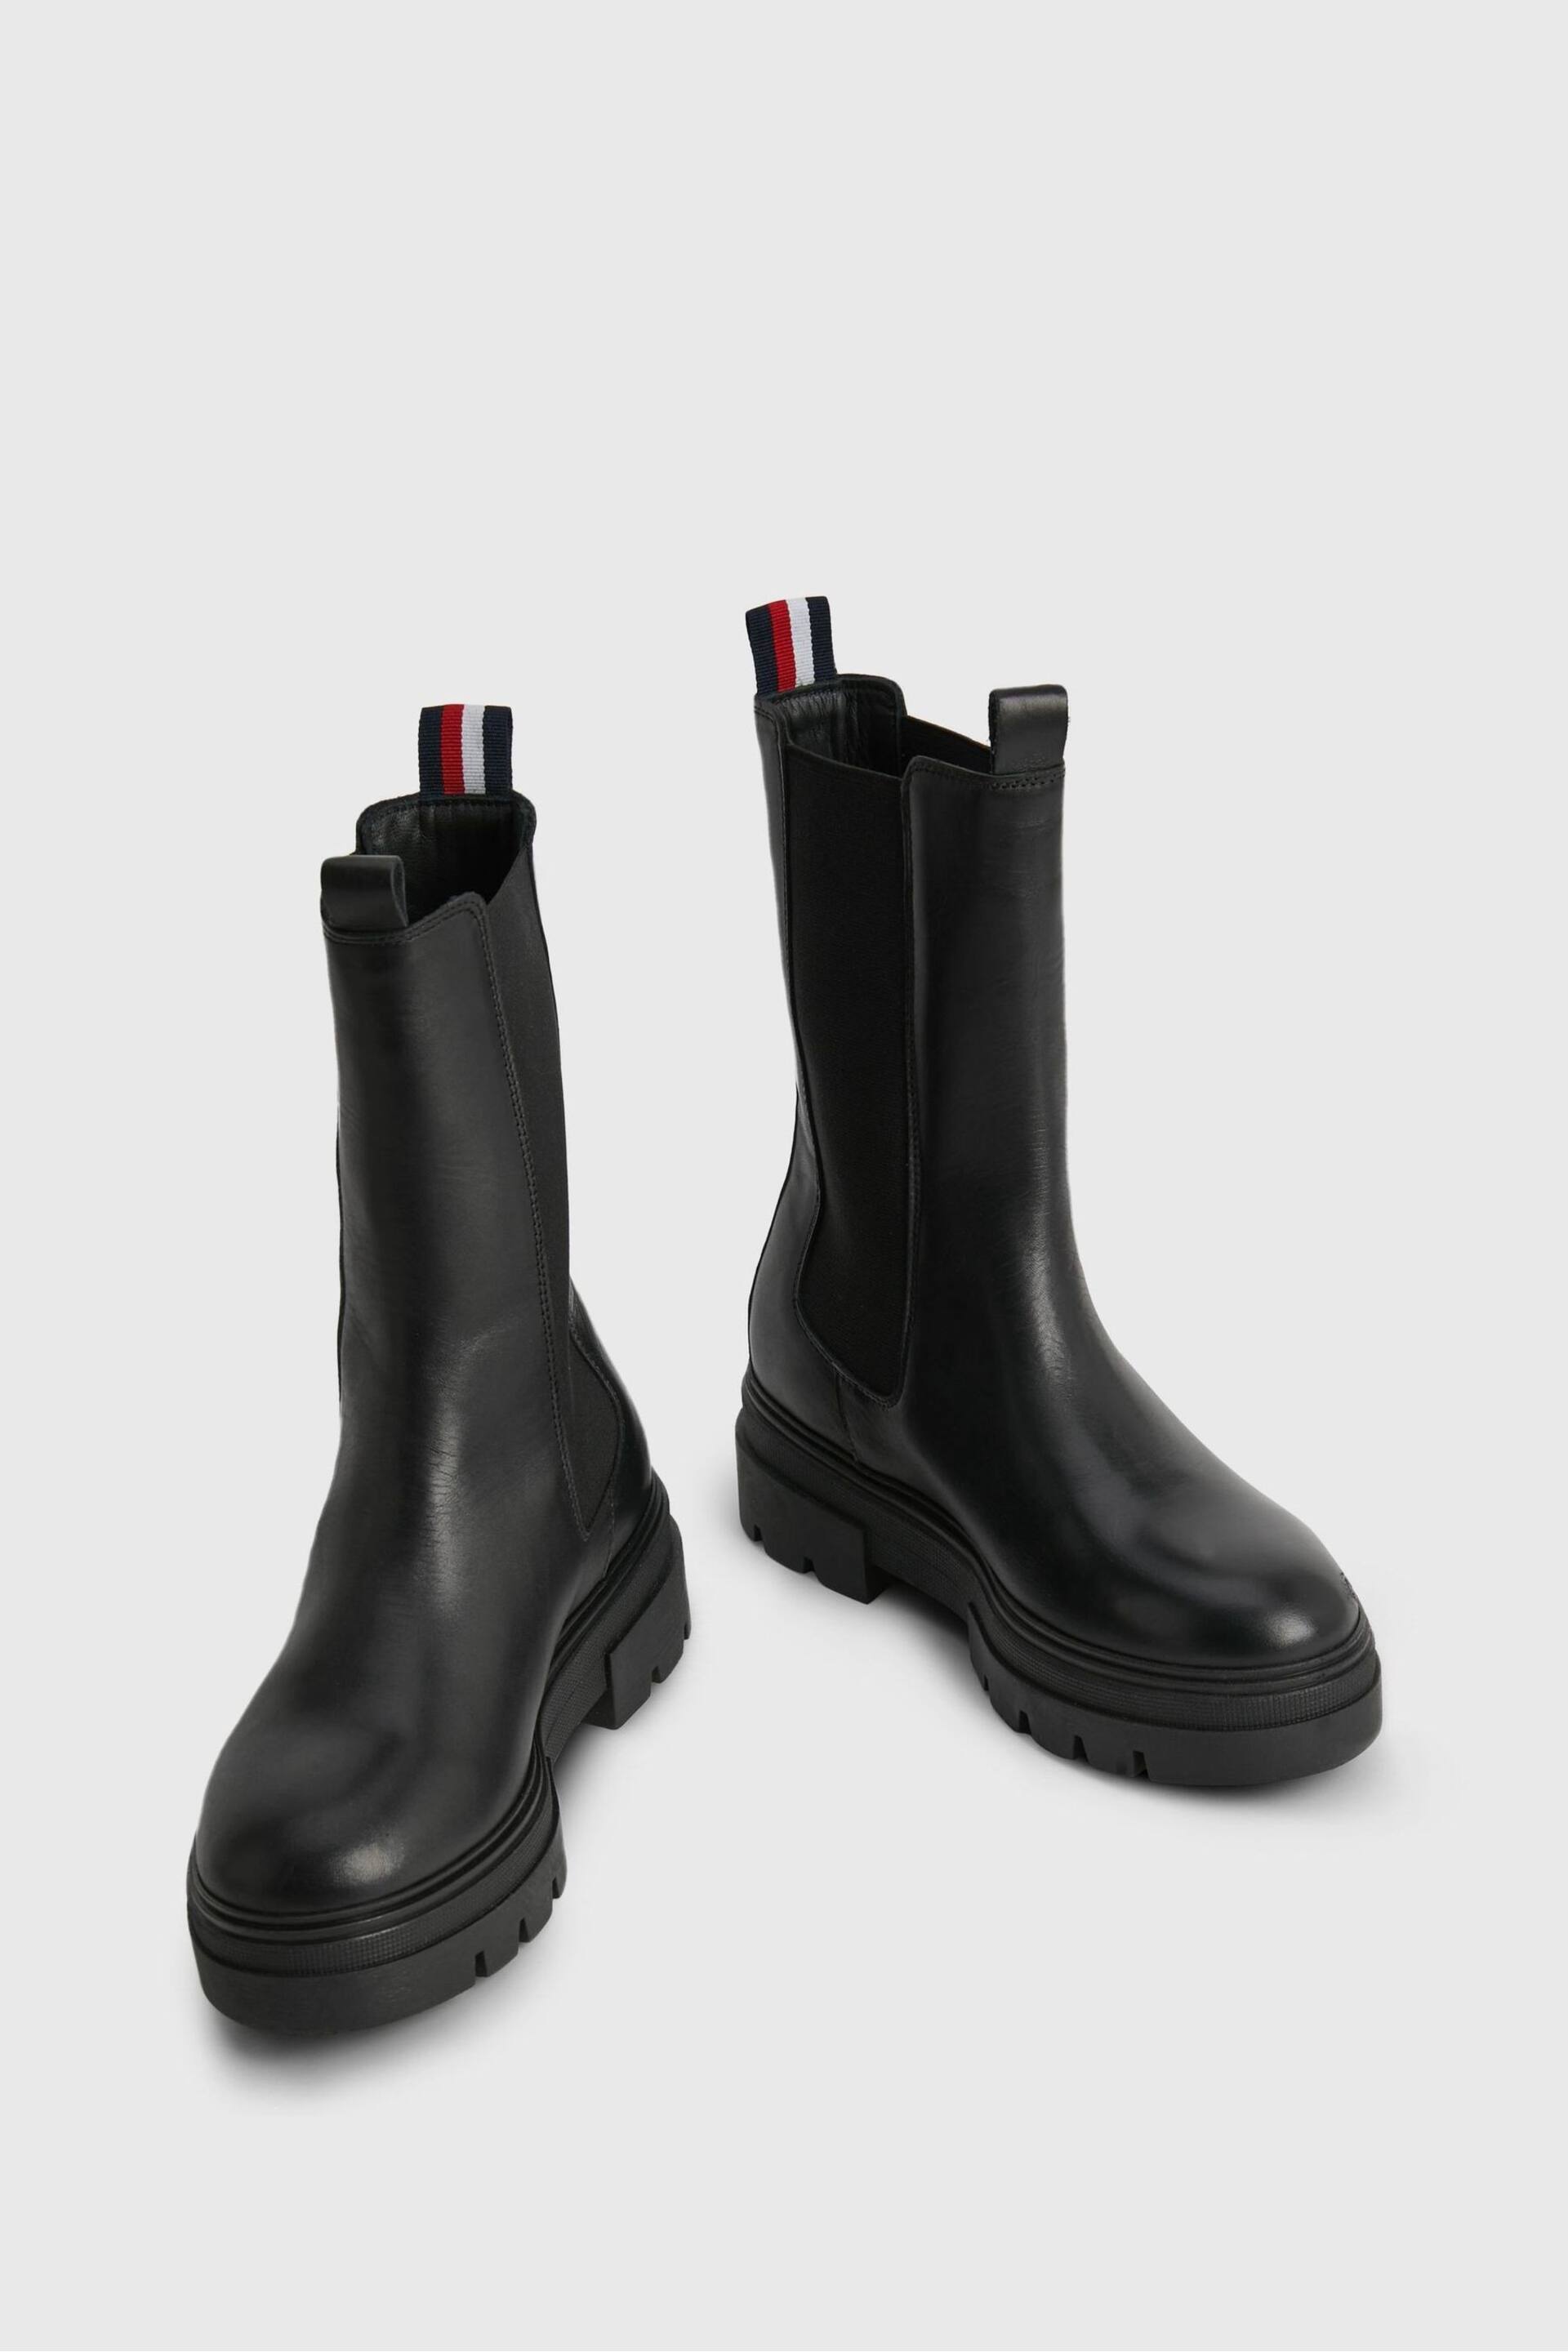 Tommy Hilfiger High Rise Chelsea Black Boots - Image 4 of 6